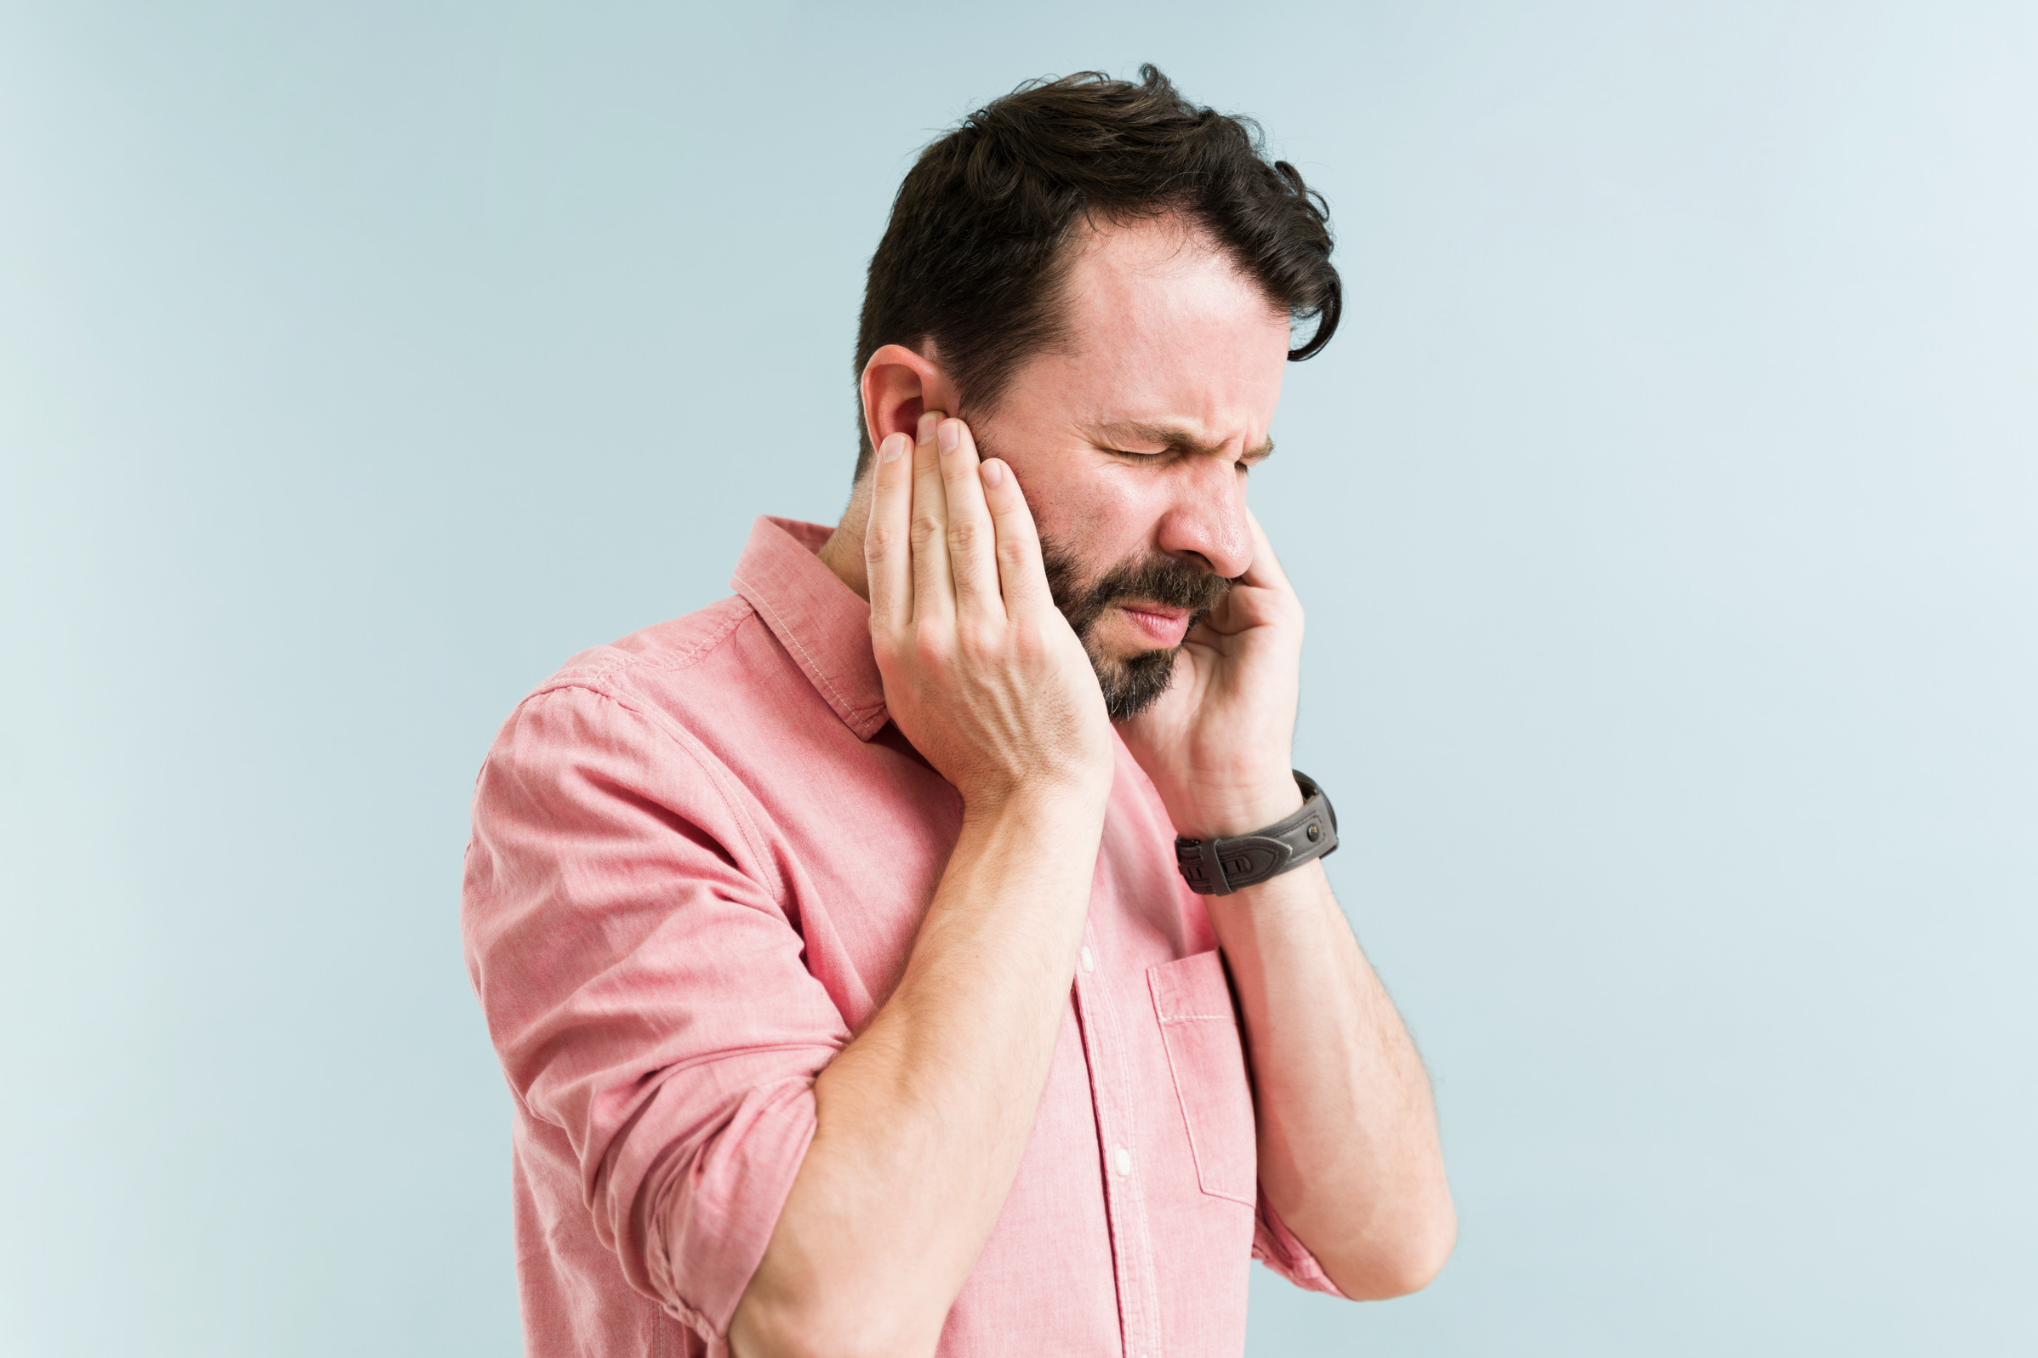 Tinnitus: What’s that Noise?